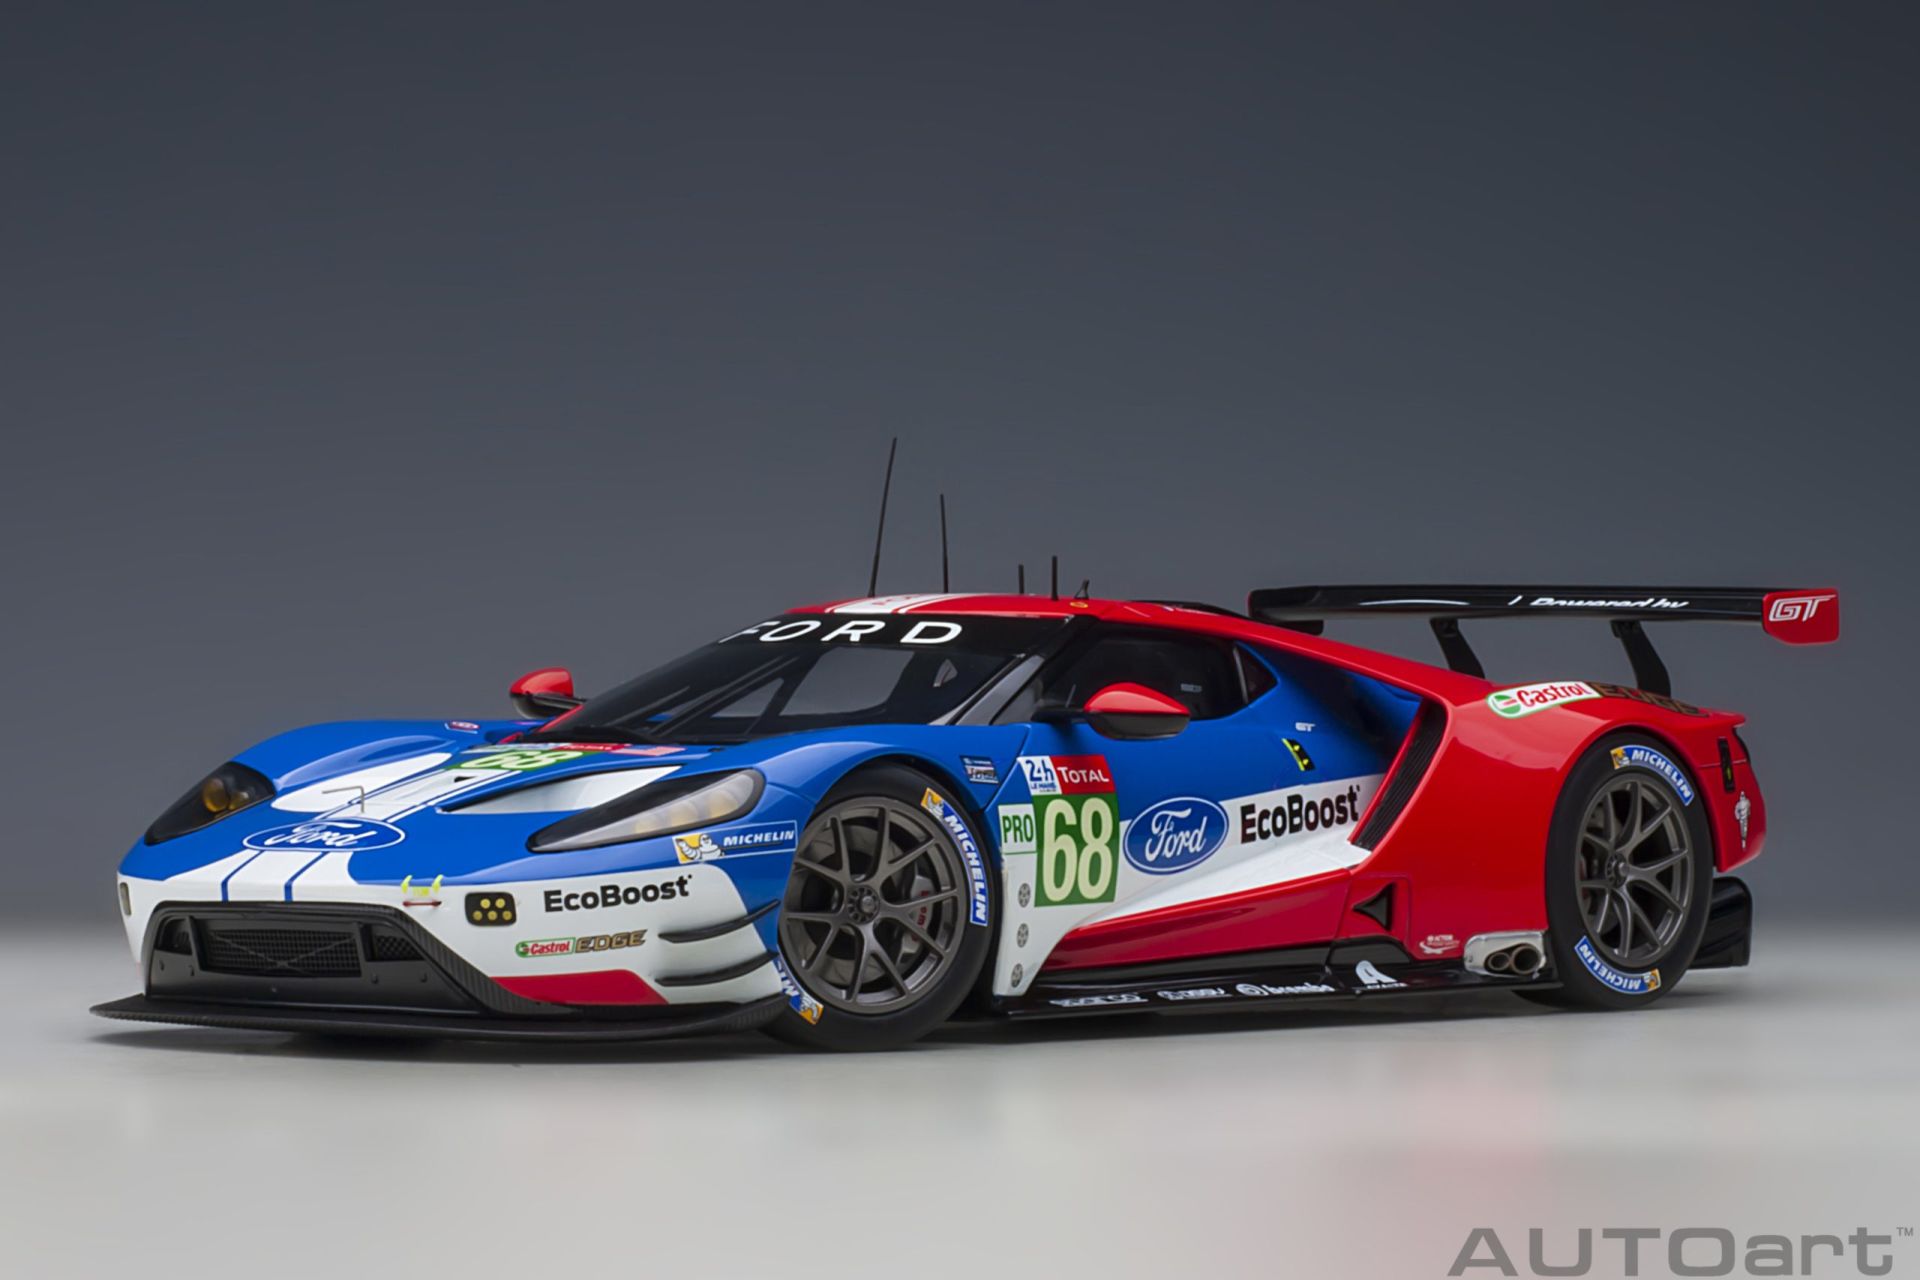 AUTOART - FORD USA - GT FORD ECOBOOST 3.5L TURBO V6 TEAM FORD CHIP GANASSI USA N 68 24h LE MANS 2019 S.BOURDAIS - J.HAND - D.MULLER